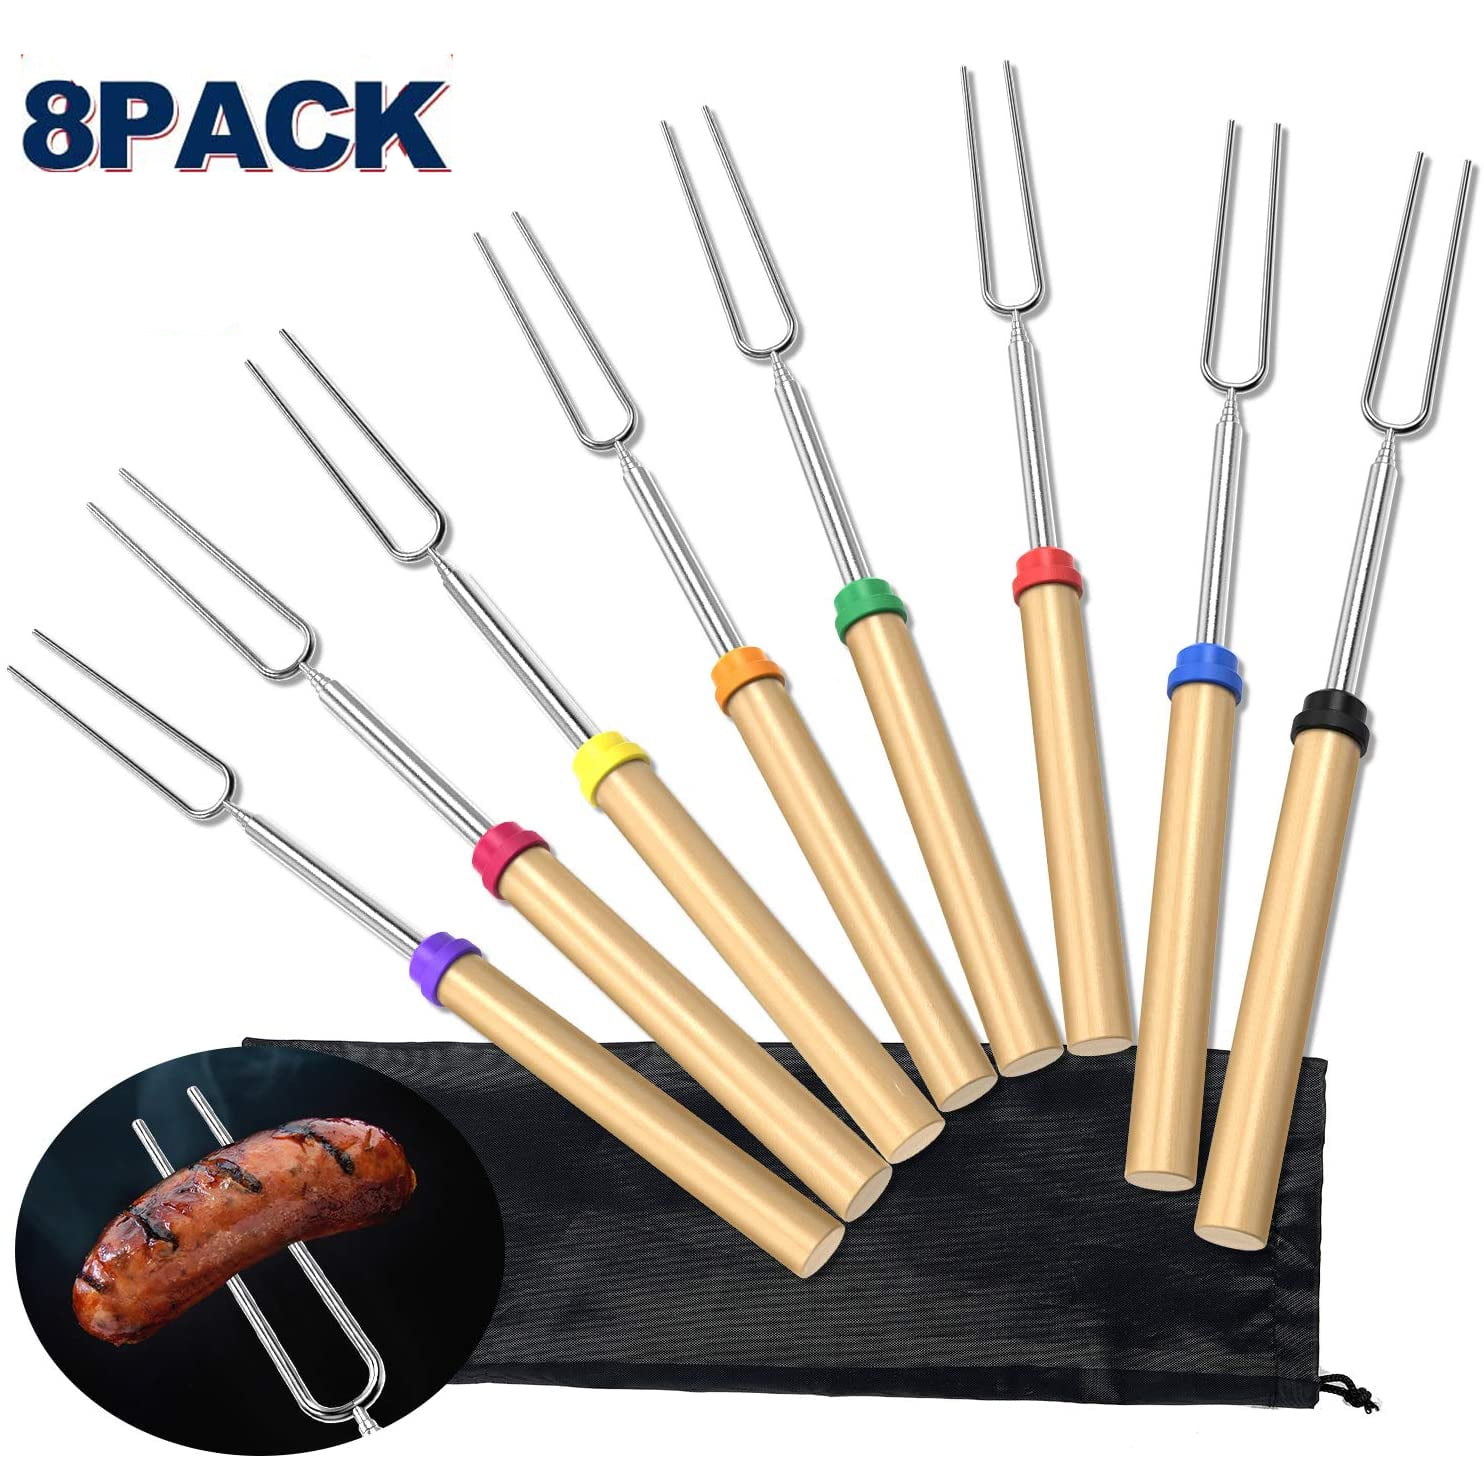 BBQ Marshmallow Roasting Sticks Extendable 32” Telescoping Rotating Forks 5 Piece set with Bonus 5 Interchangeable Heads Fire Pit 10 Bamboo Skewers and Storage Bag By Kitchenson Campfires Camping 